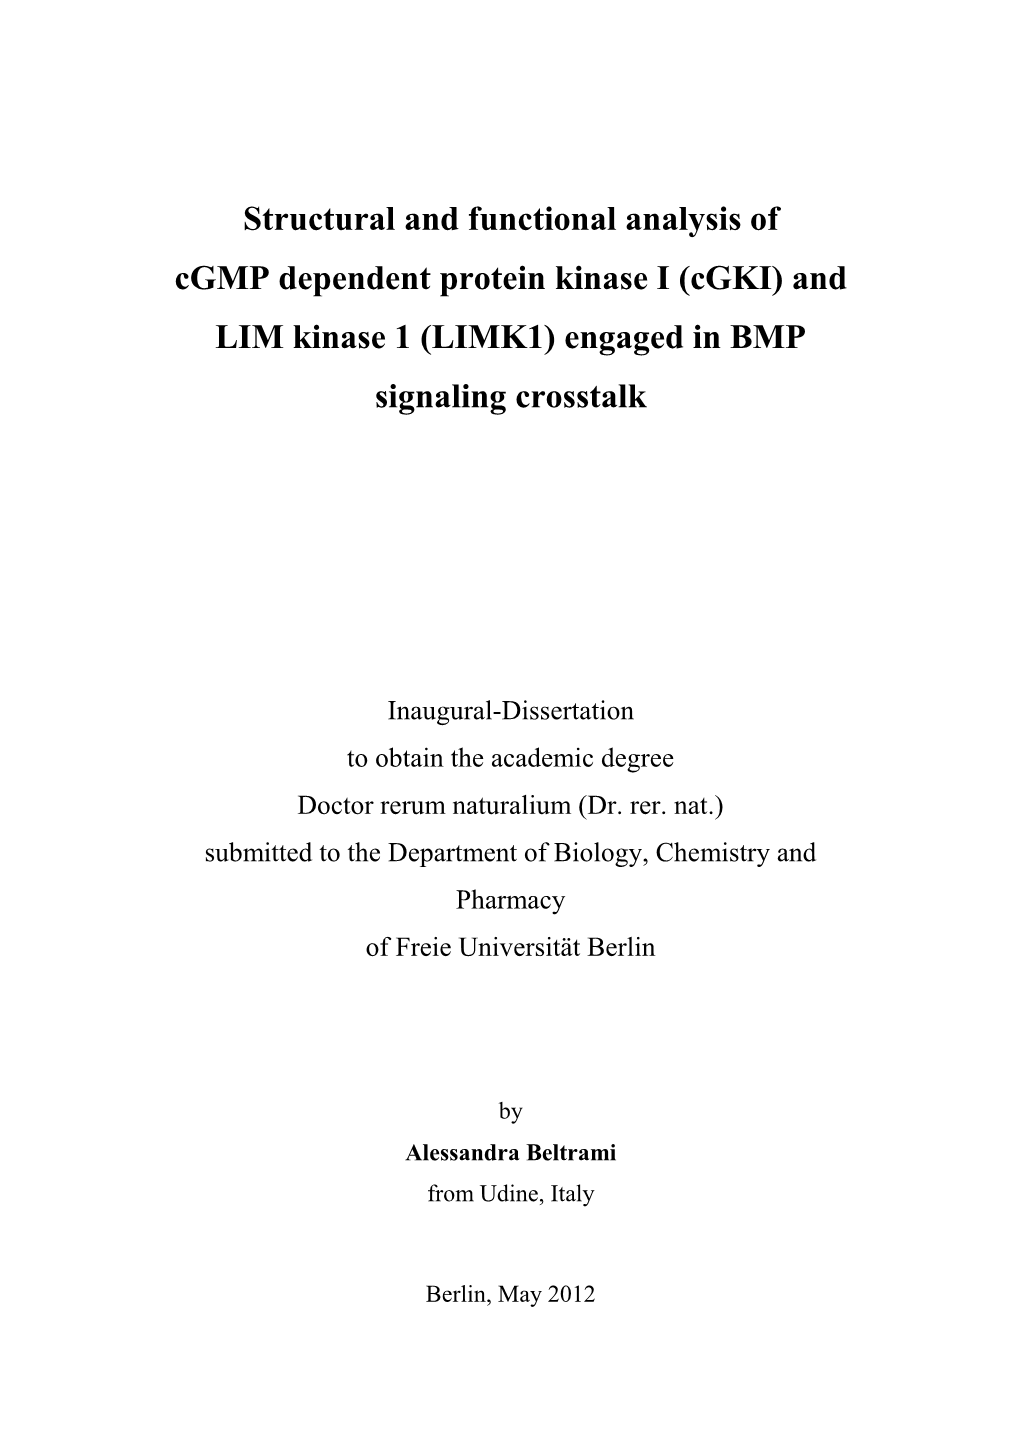 Structural and Functional Analysis of Cgmp Dependent Protein Kinase I (Cgki) and LIM Kinase 1 (LIMK1) Engaged in BMP Signaling Crosstalk